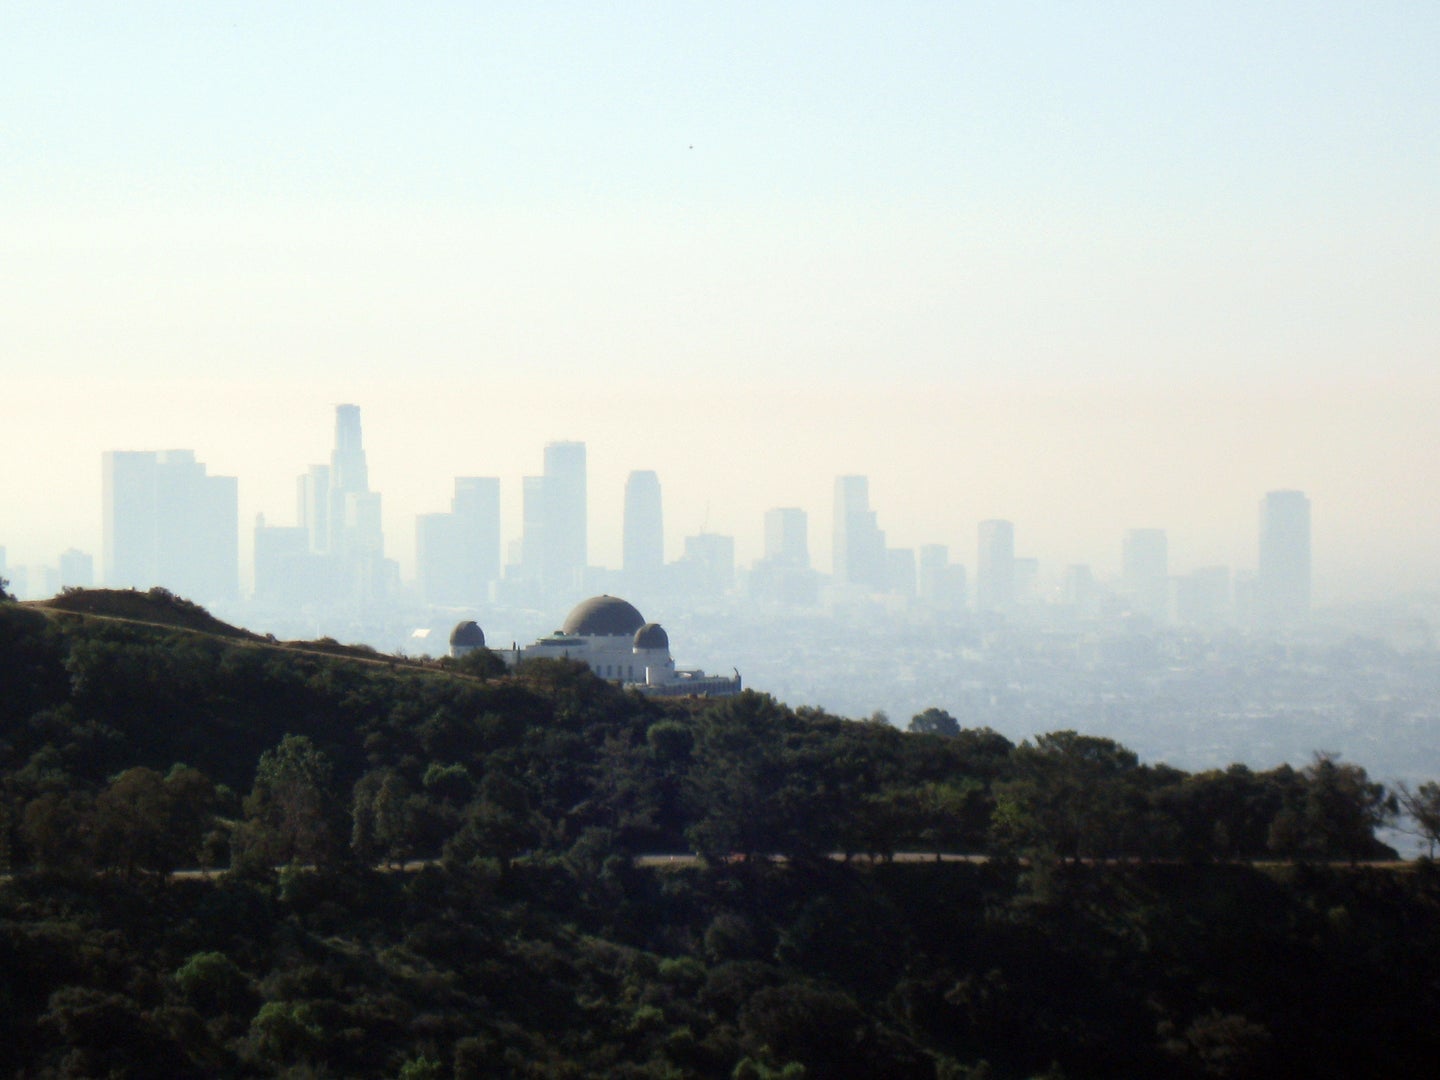 California Plans To Drastically Cut Carbon Emissions By 2030